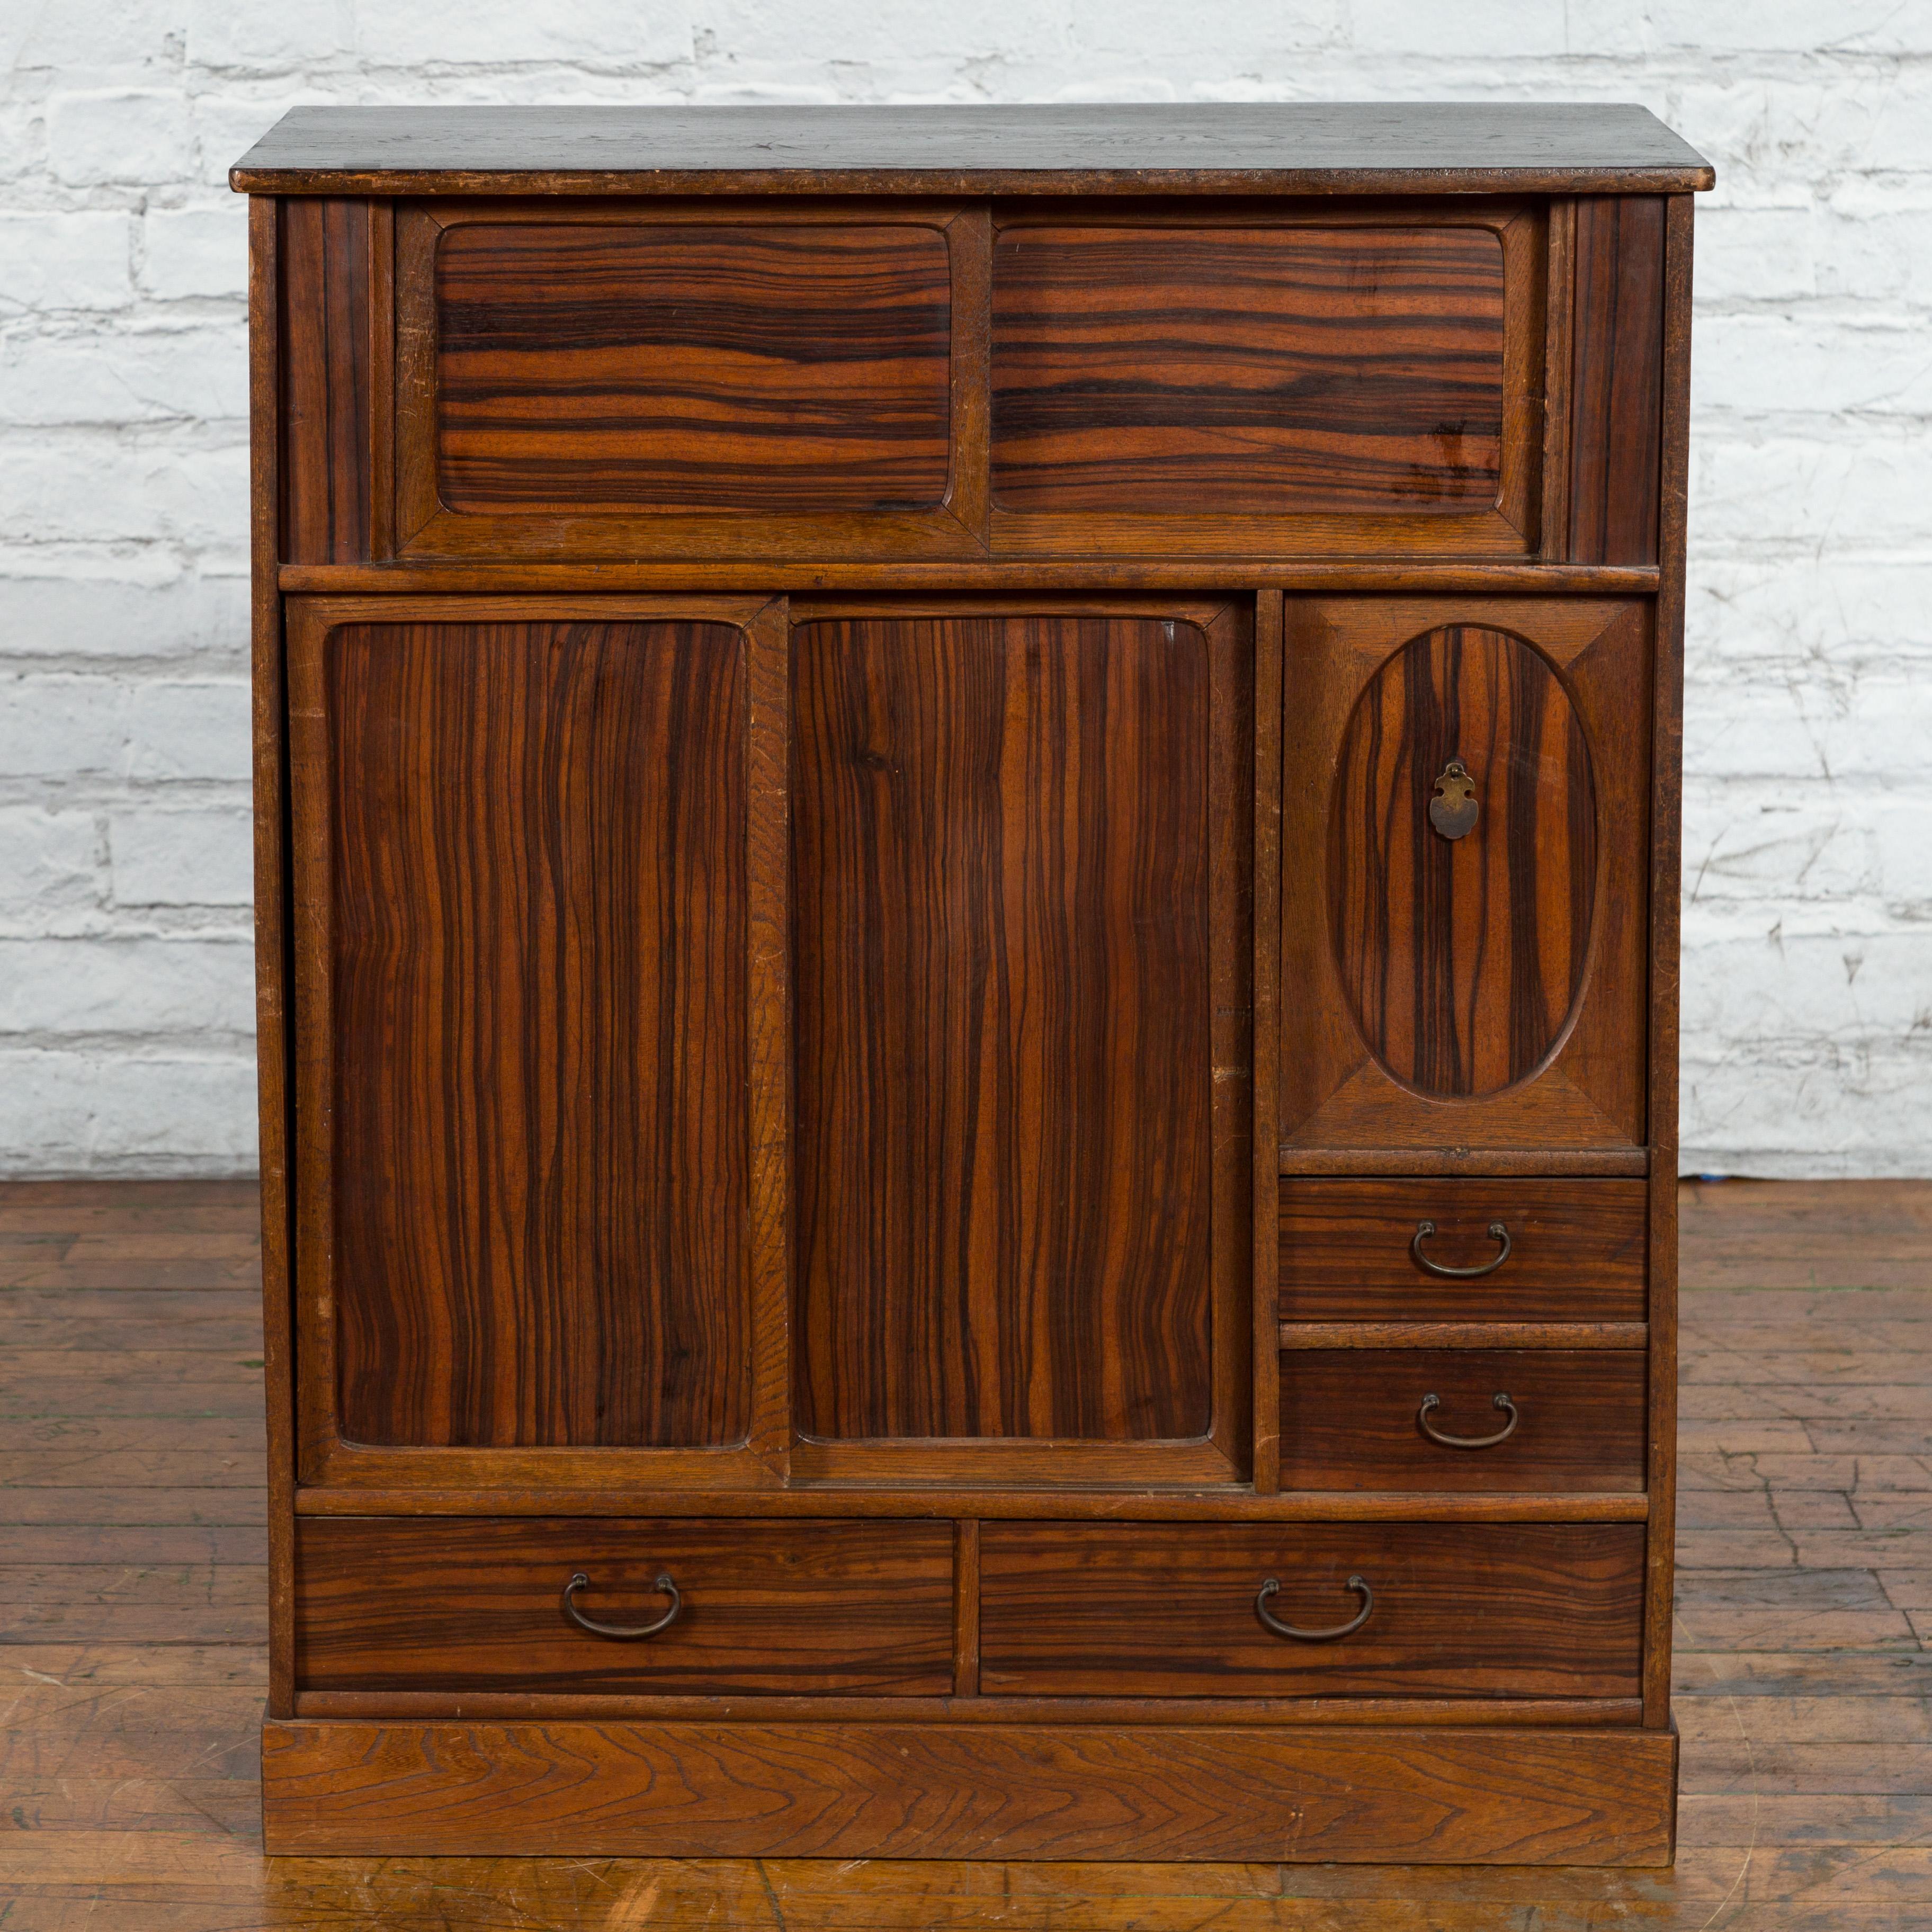 Japanese 19th Century Zebra Wood Cabinet with Sliding Doors, Panel and Drawers For Sale 3